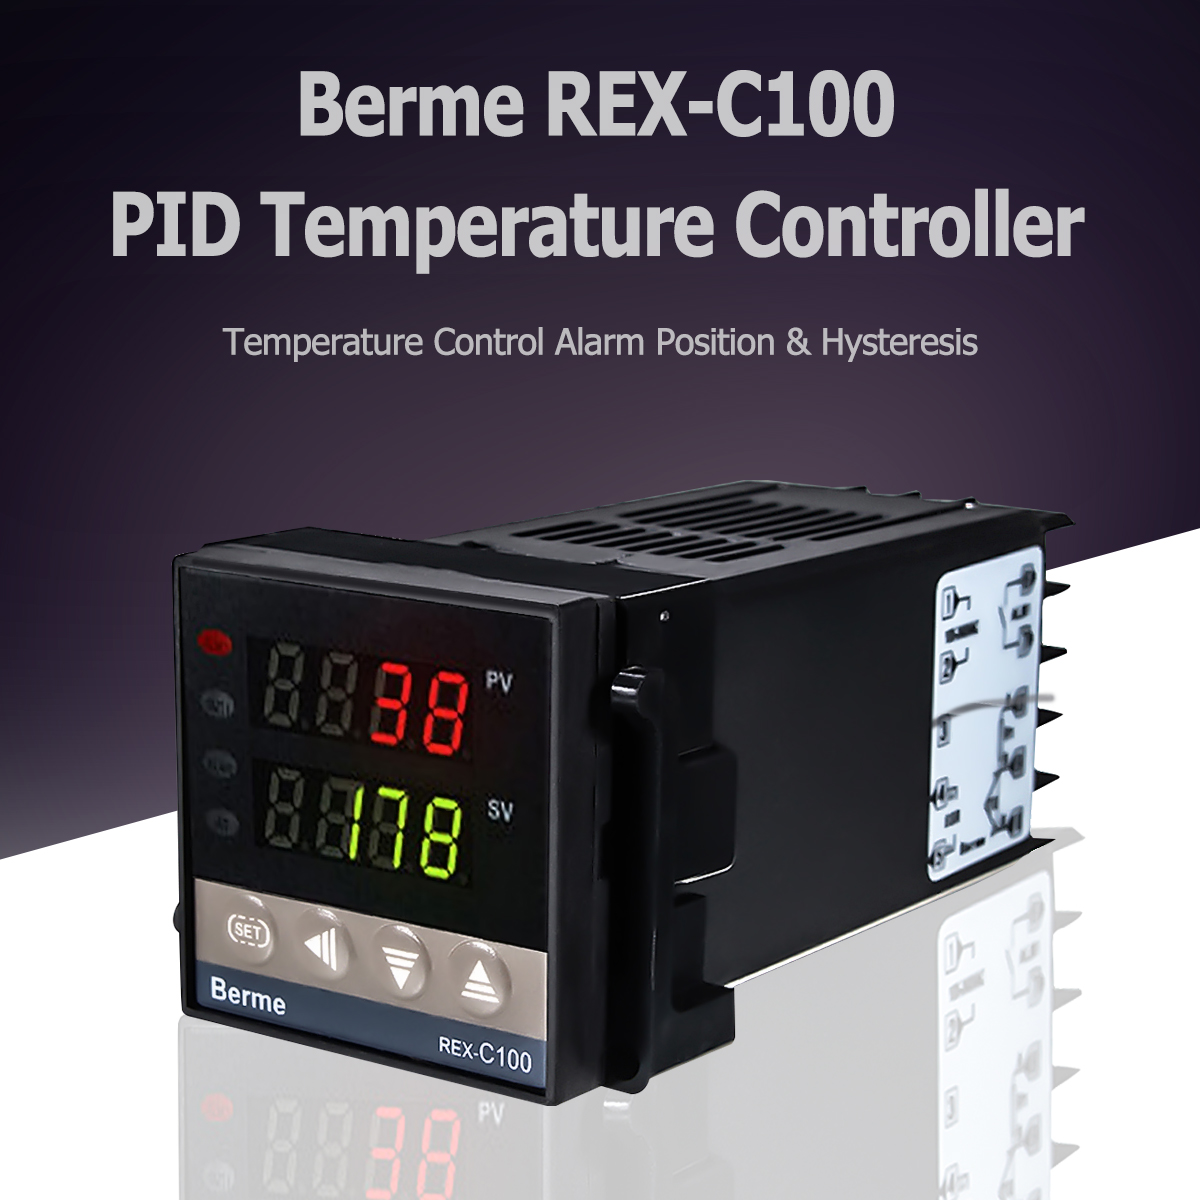 110-240V-01300-REX-C100-Digital-PID-Temperature-Controller-Kit-Alarm-Function-With-Probe-Relay-1351235-2